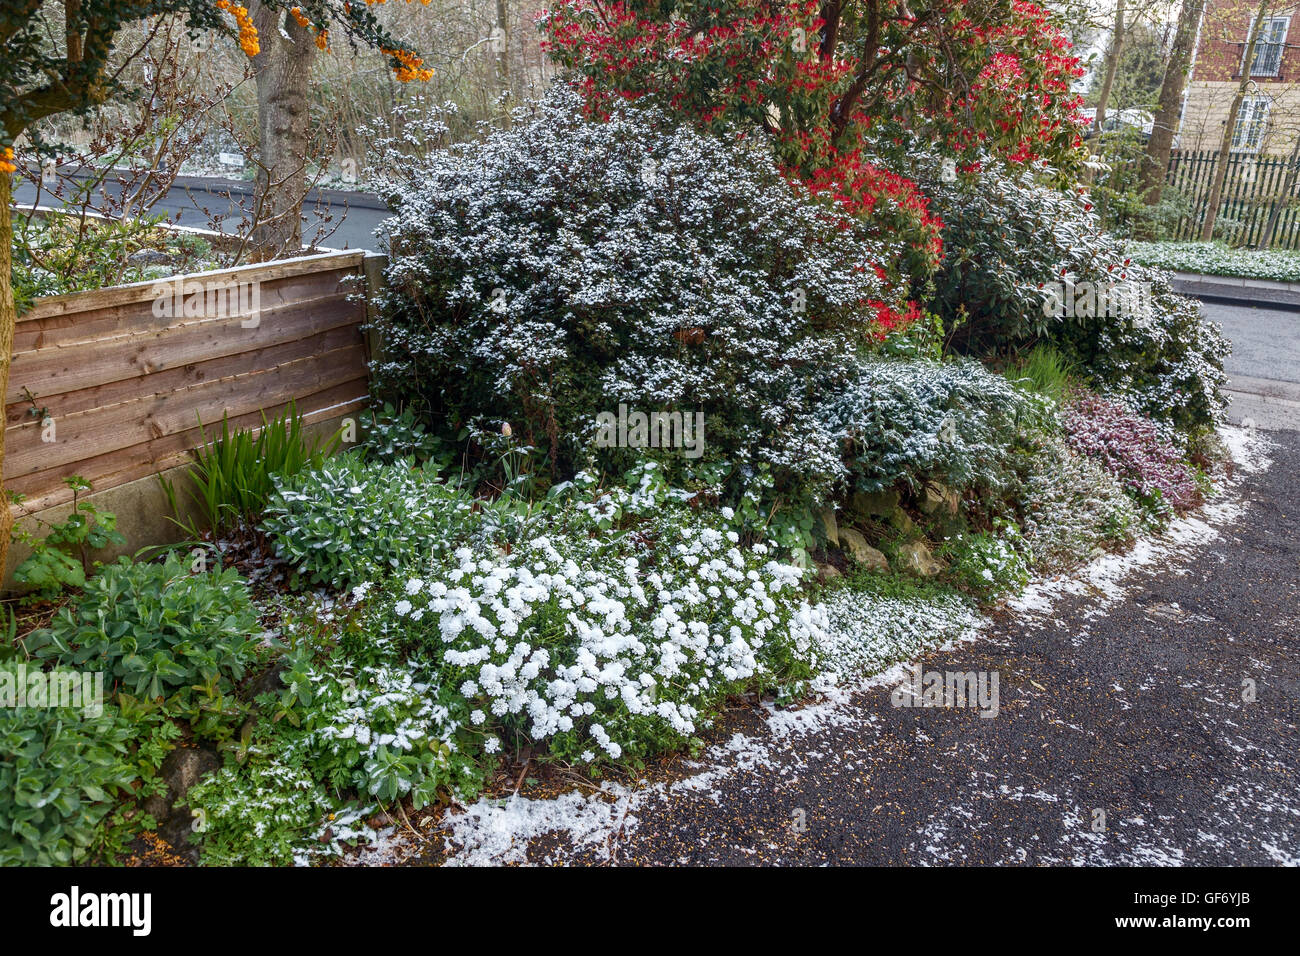 Late April snow on candytuft, azlea, heather, pieris and rhododendron in UK garden Stock Photo